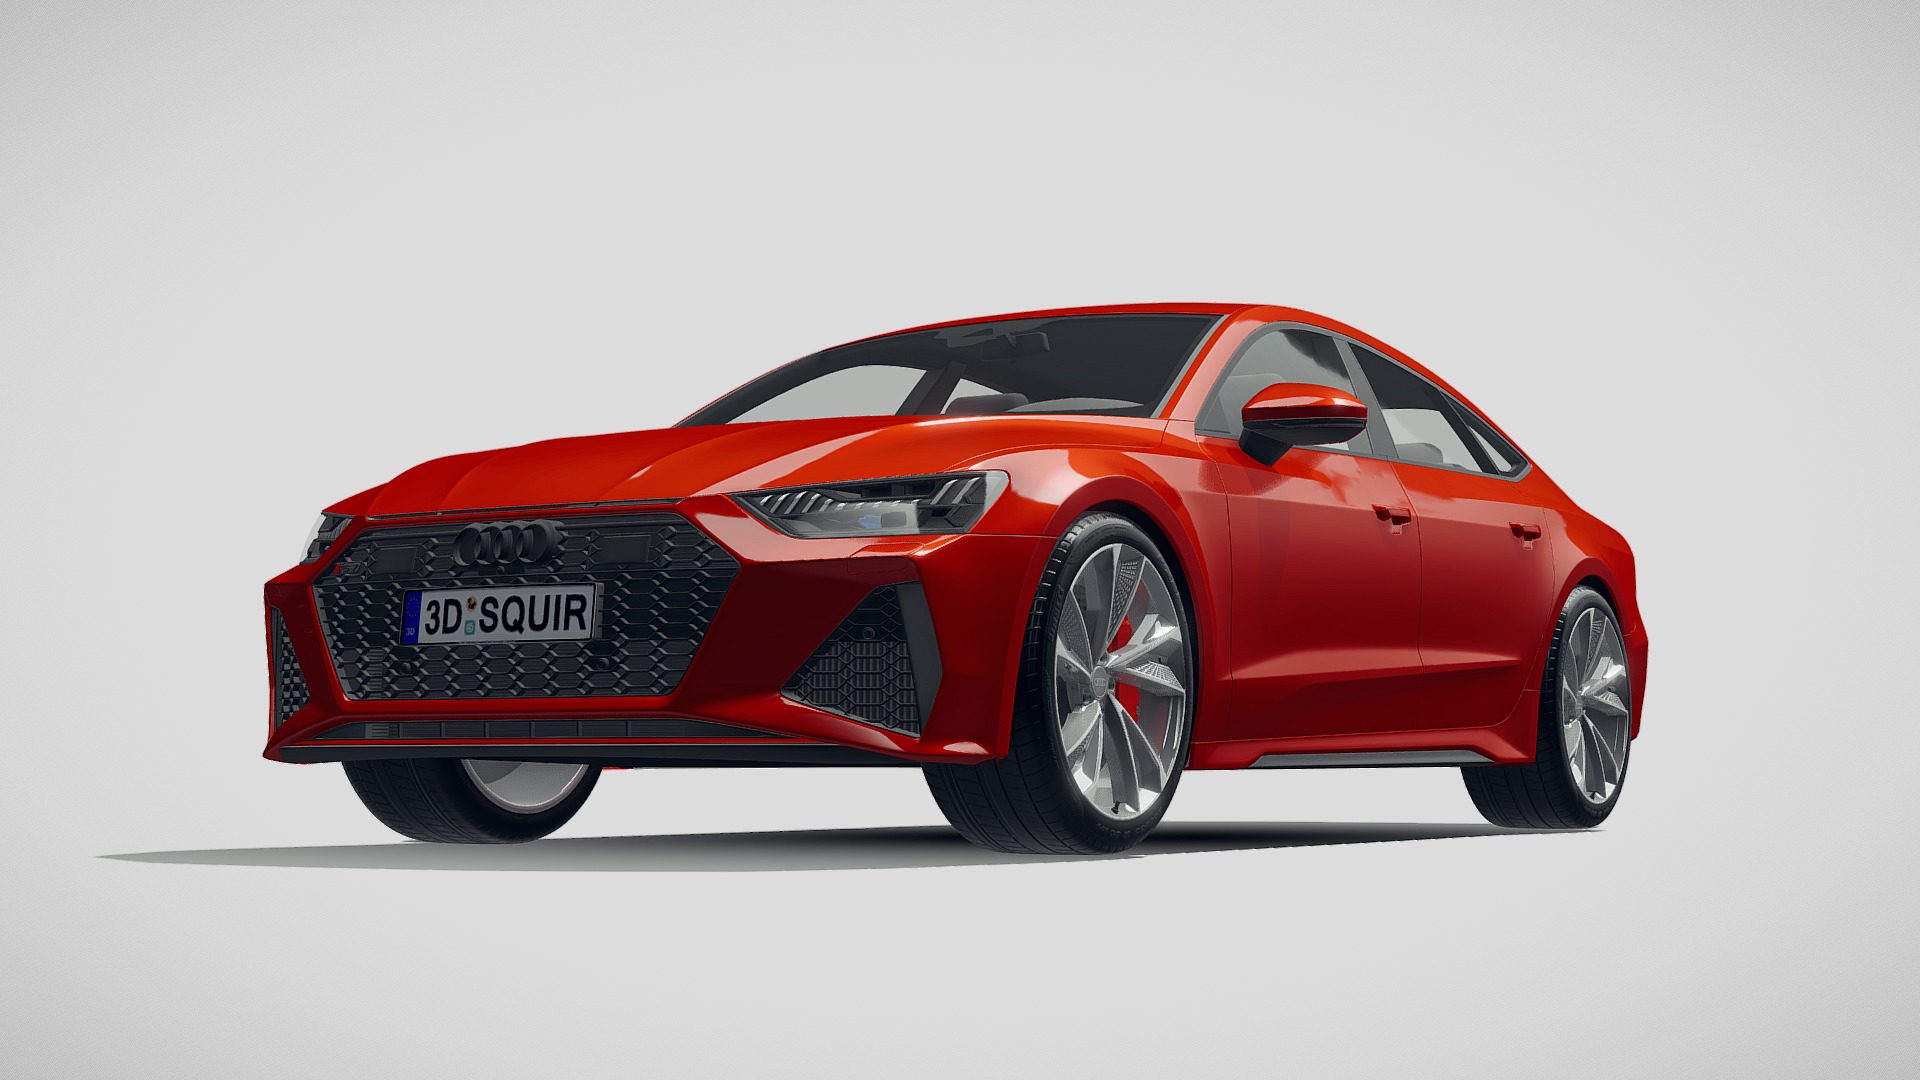 3D model Audi RS7 Sportback 2020 - This is a 3D model of the Audi RS7 Sportback 2020. The 3D model is about a red sports car.